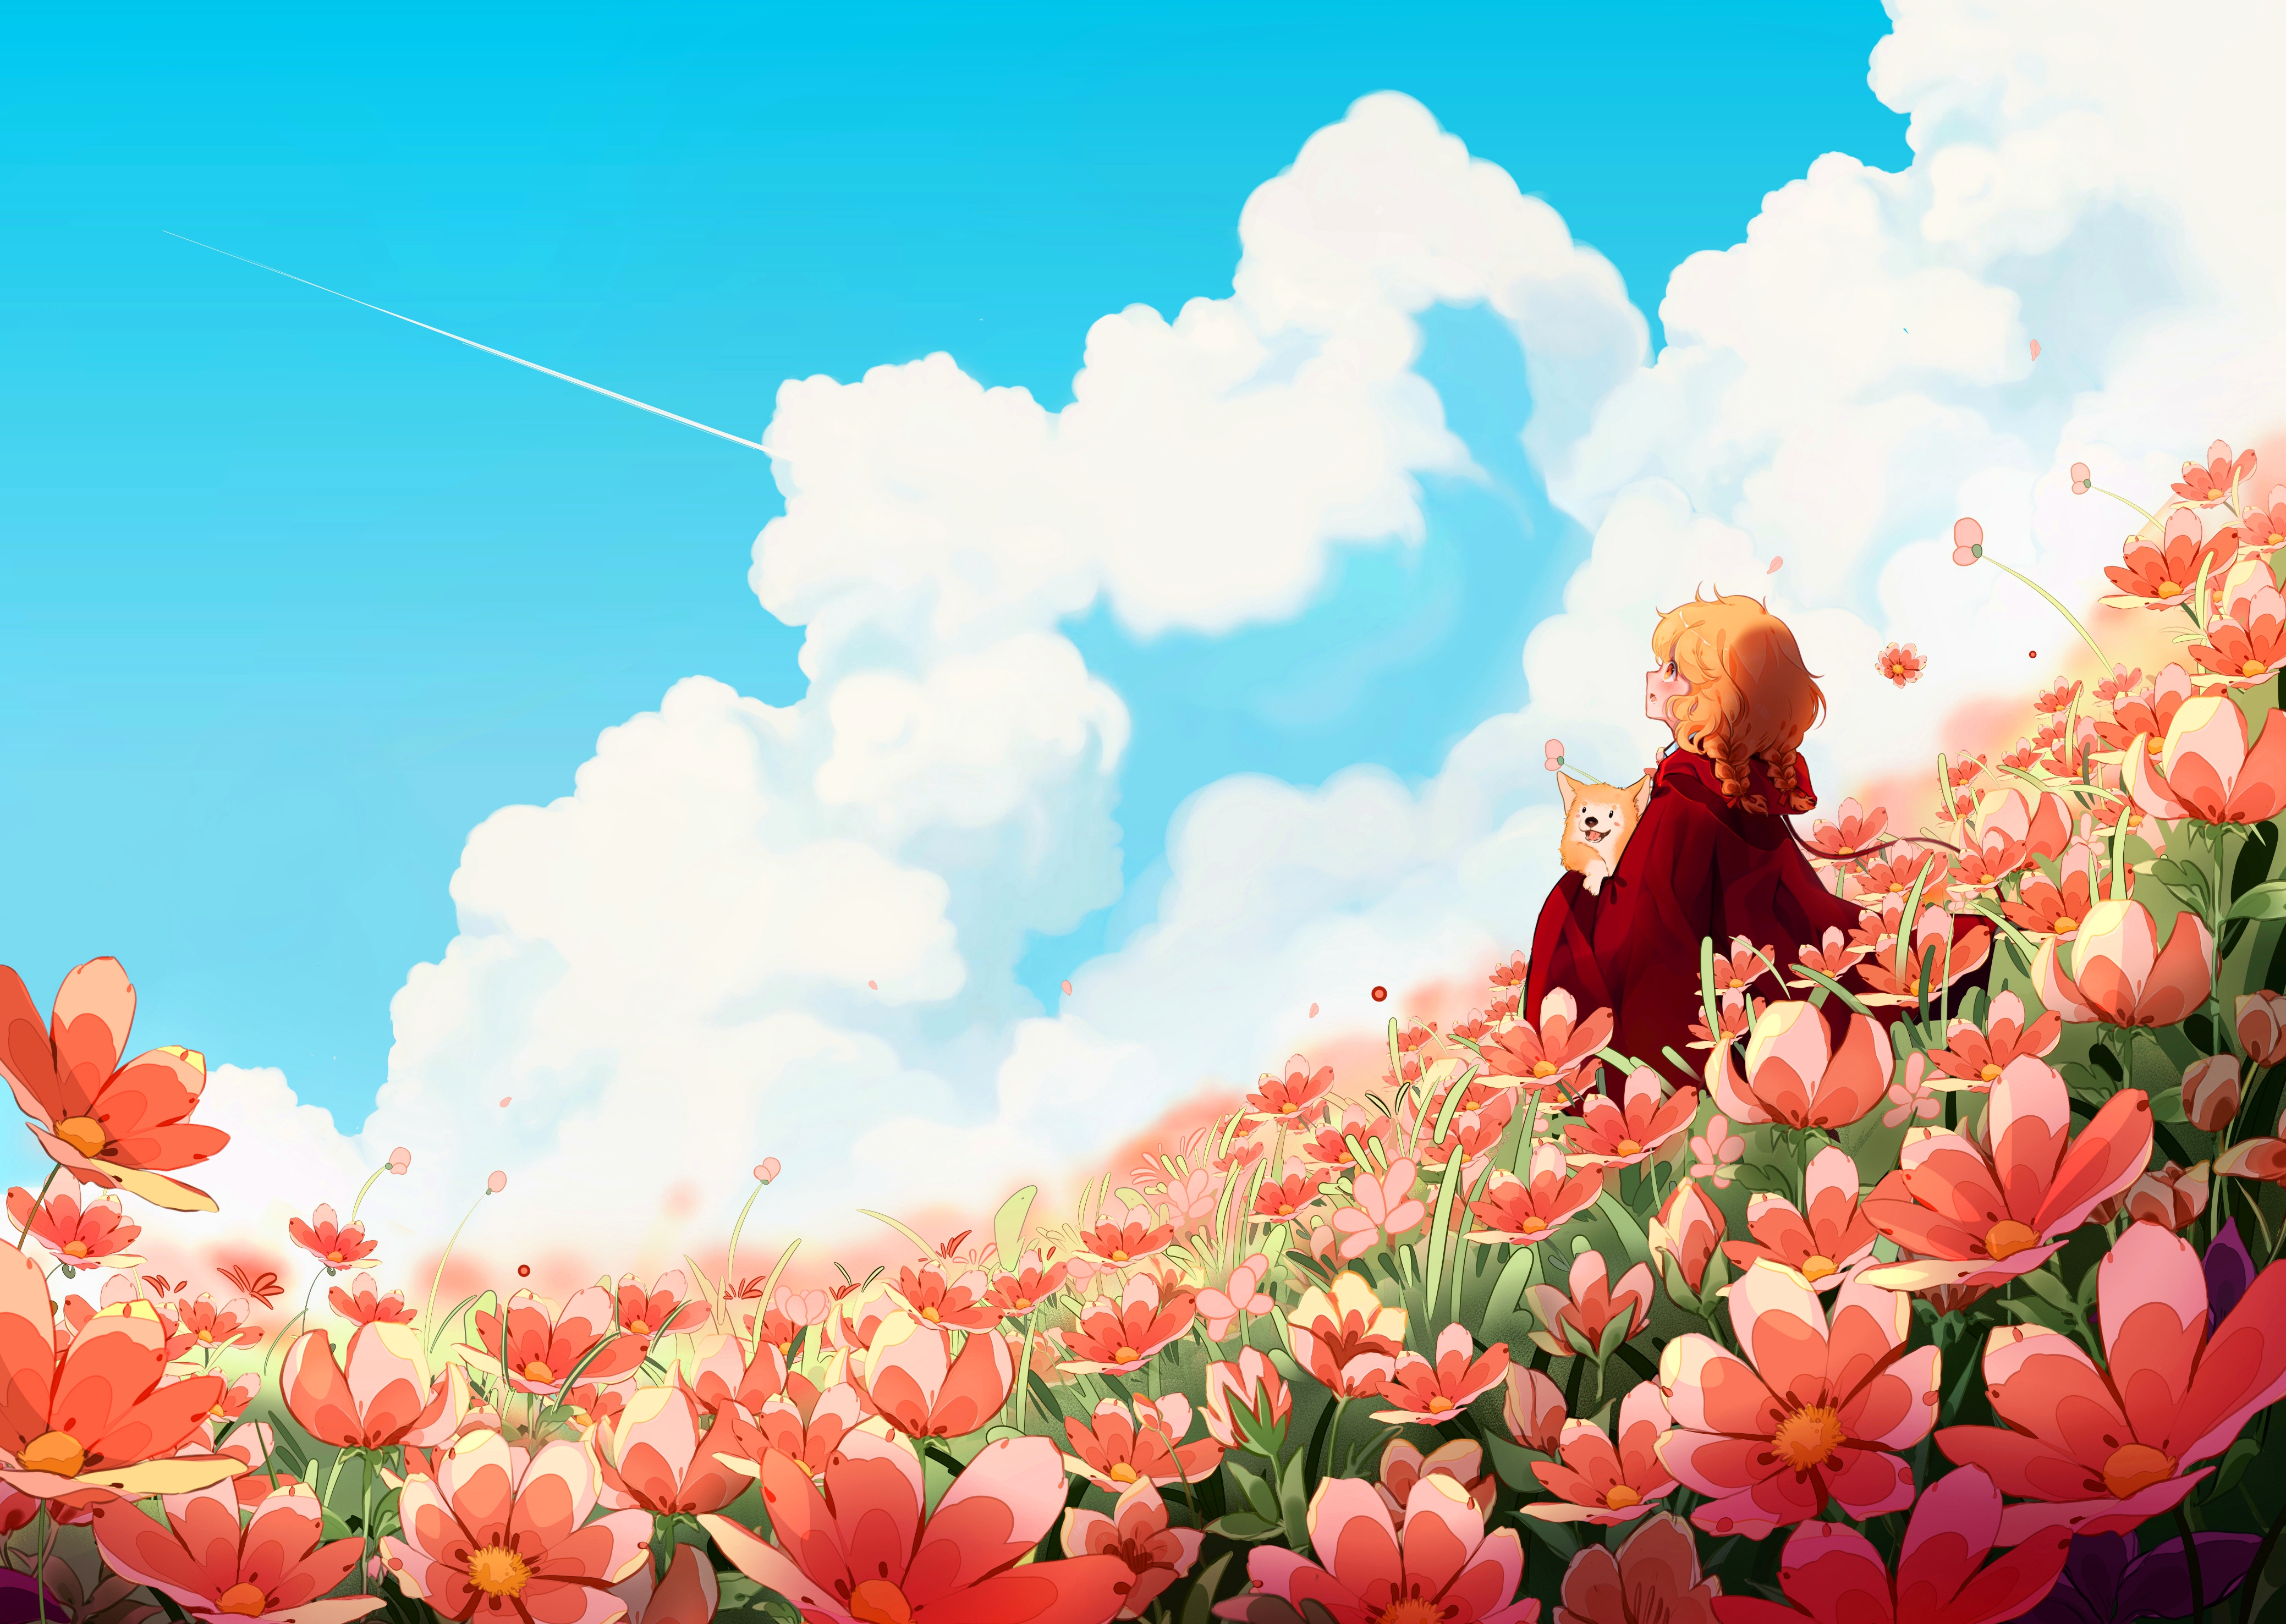 Touyachann Looking Up Pink Flowers Red Hoodie Twintails Women Outdoors Field Flowers Clouds Sky Dog  4156x2953